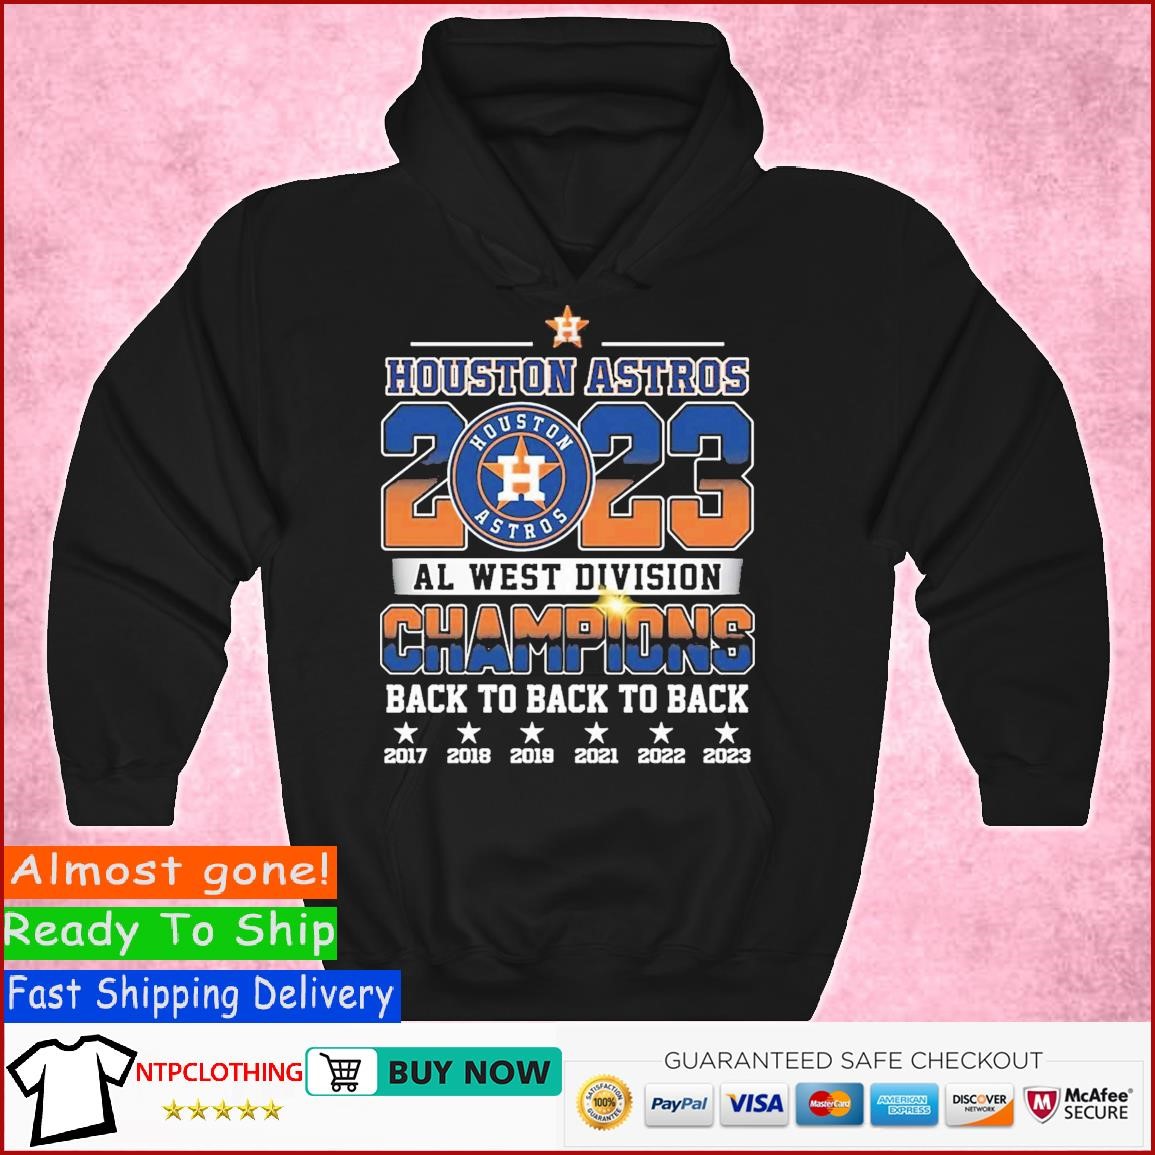 Go Astros 2022 World Series Champions Houston Astros 2017,2022 shirt,  hoodie, sweater, long sleeve and tank top